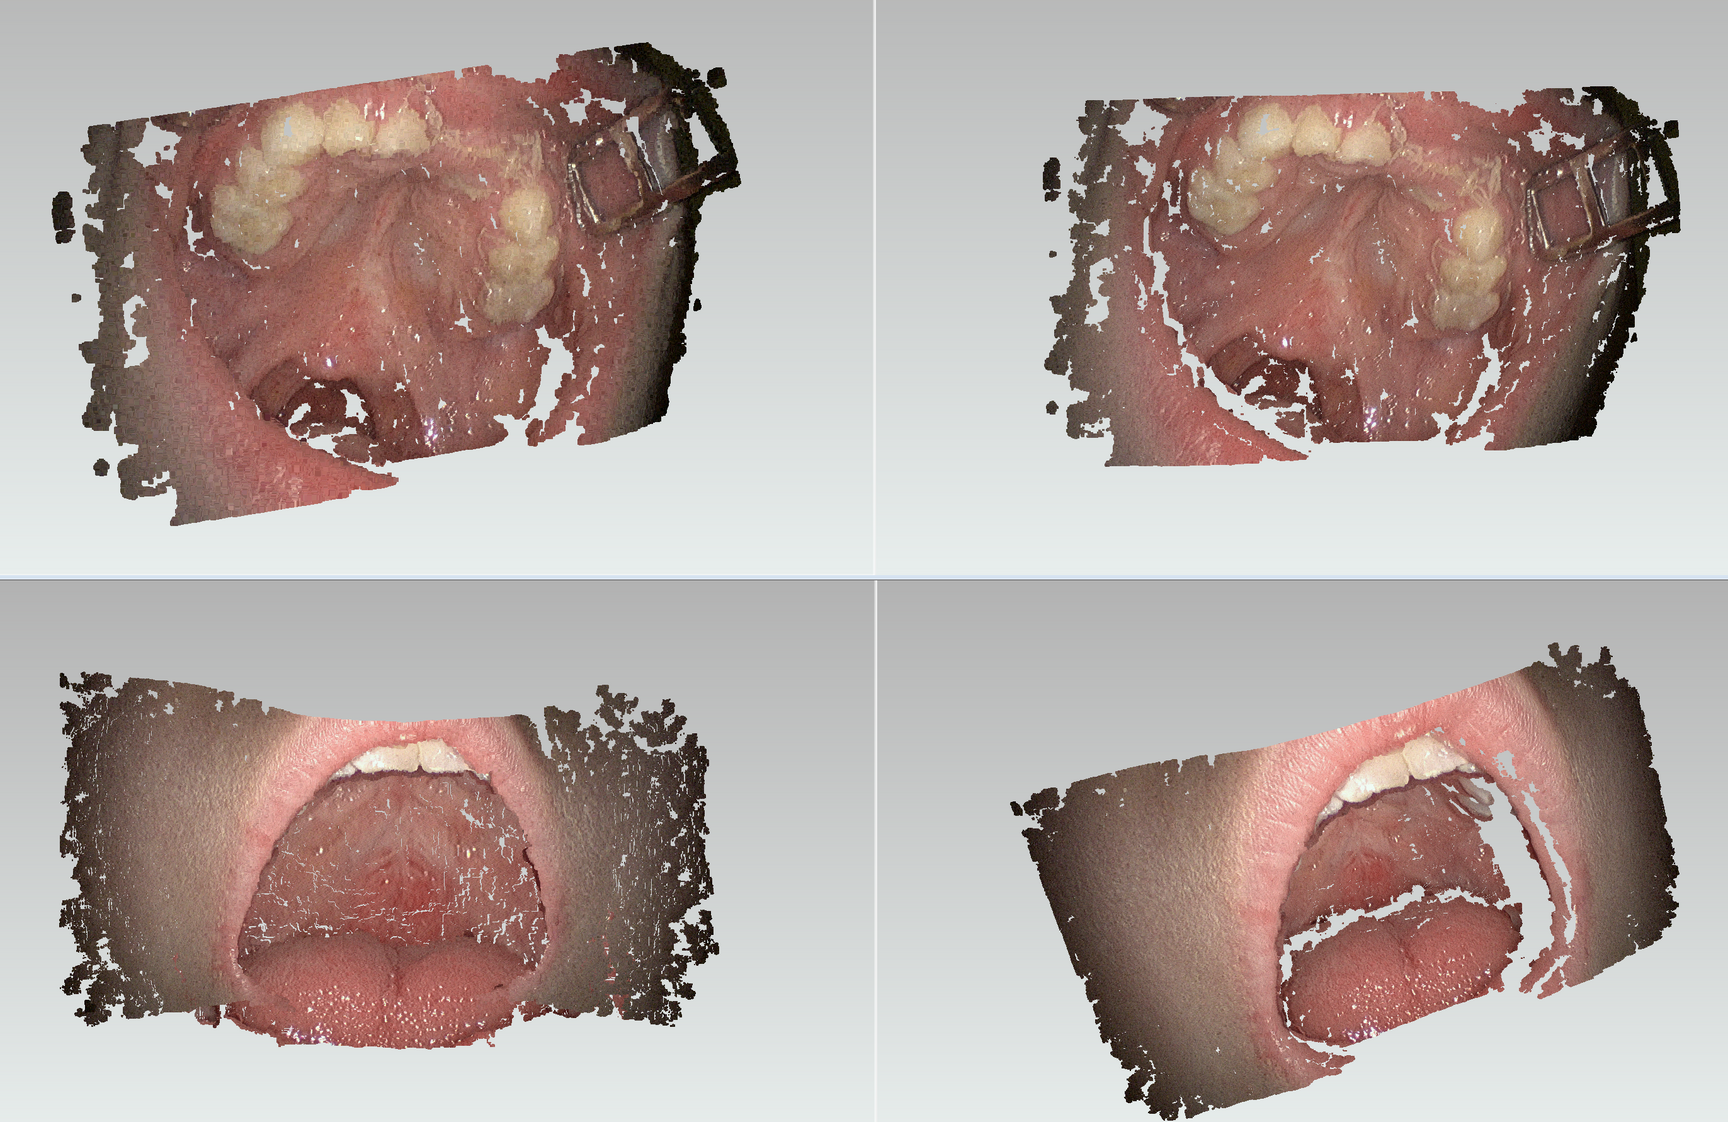 Reconstruction of an oral cavity